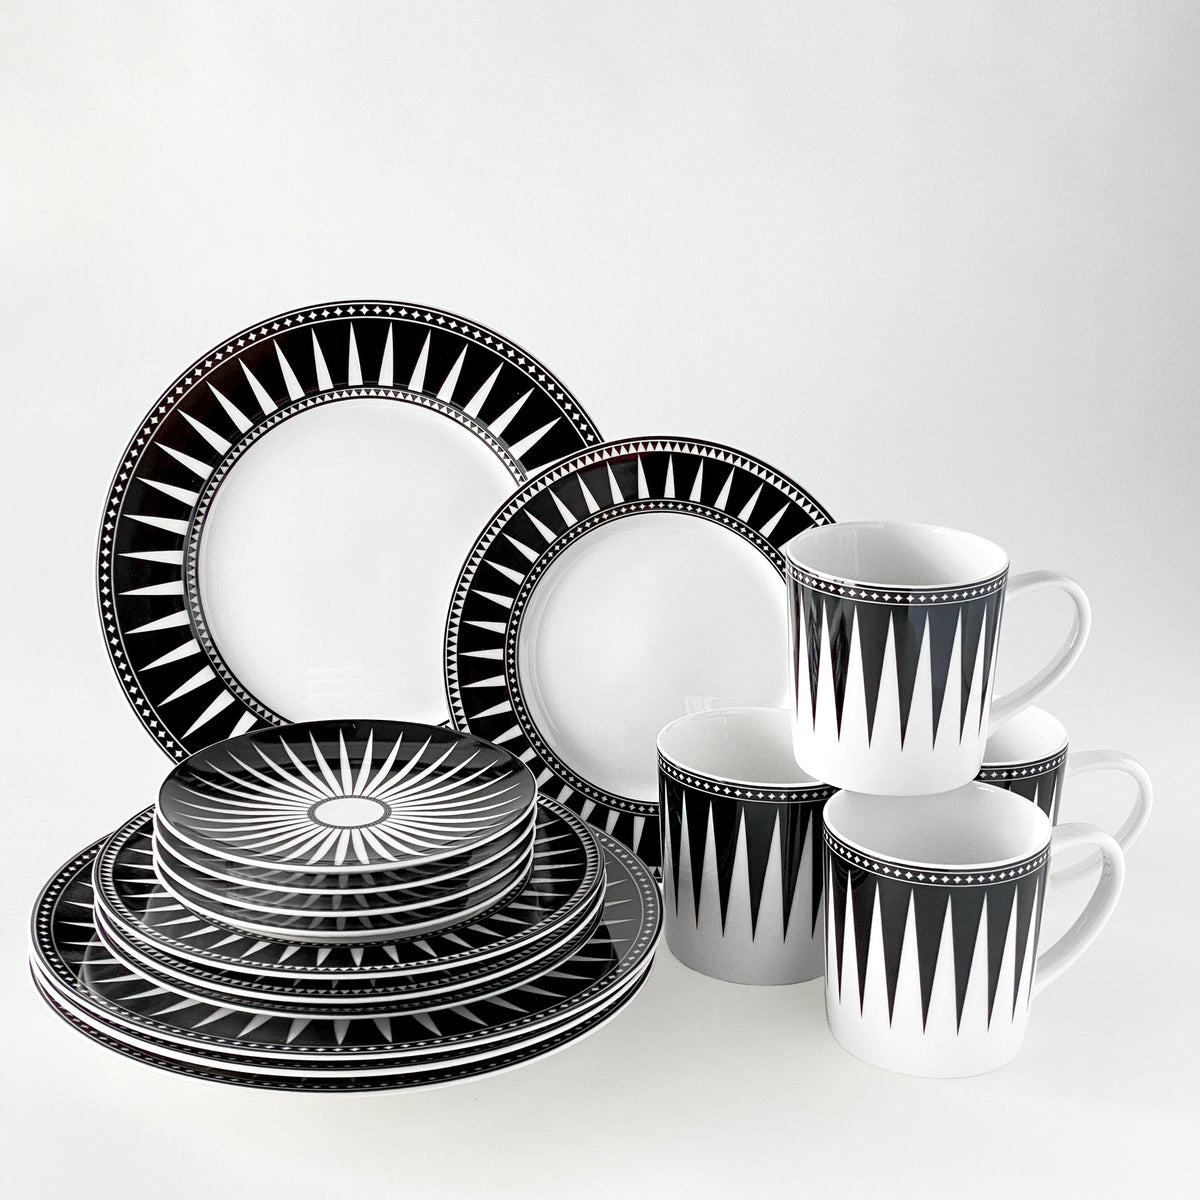 A black and white geometric patterned 16-piece dinnerware set in high-fired porcelain, including dinner plates, salad plates, bowls, and mugs, arranged on a white background. This exquisite Marrakech-inspired collection also features elegant Caskata Artisanal Home Marrakech Small Plates for a complete dining experience.